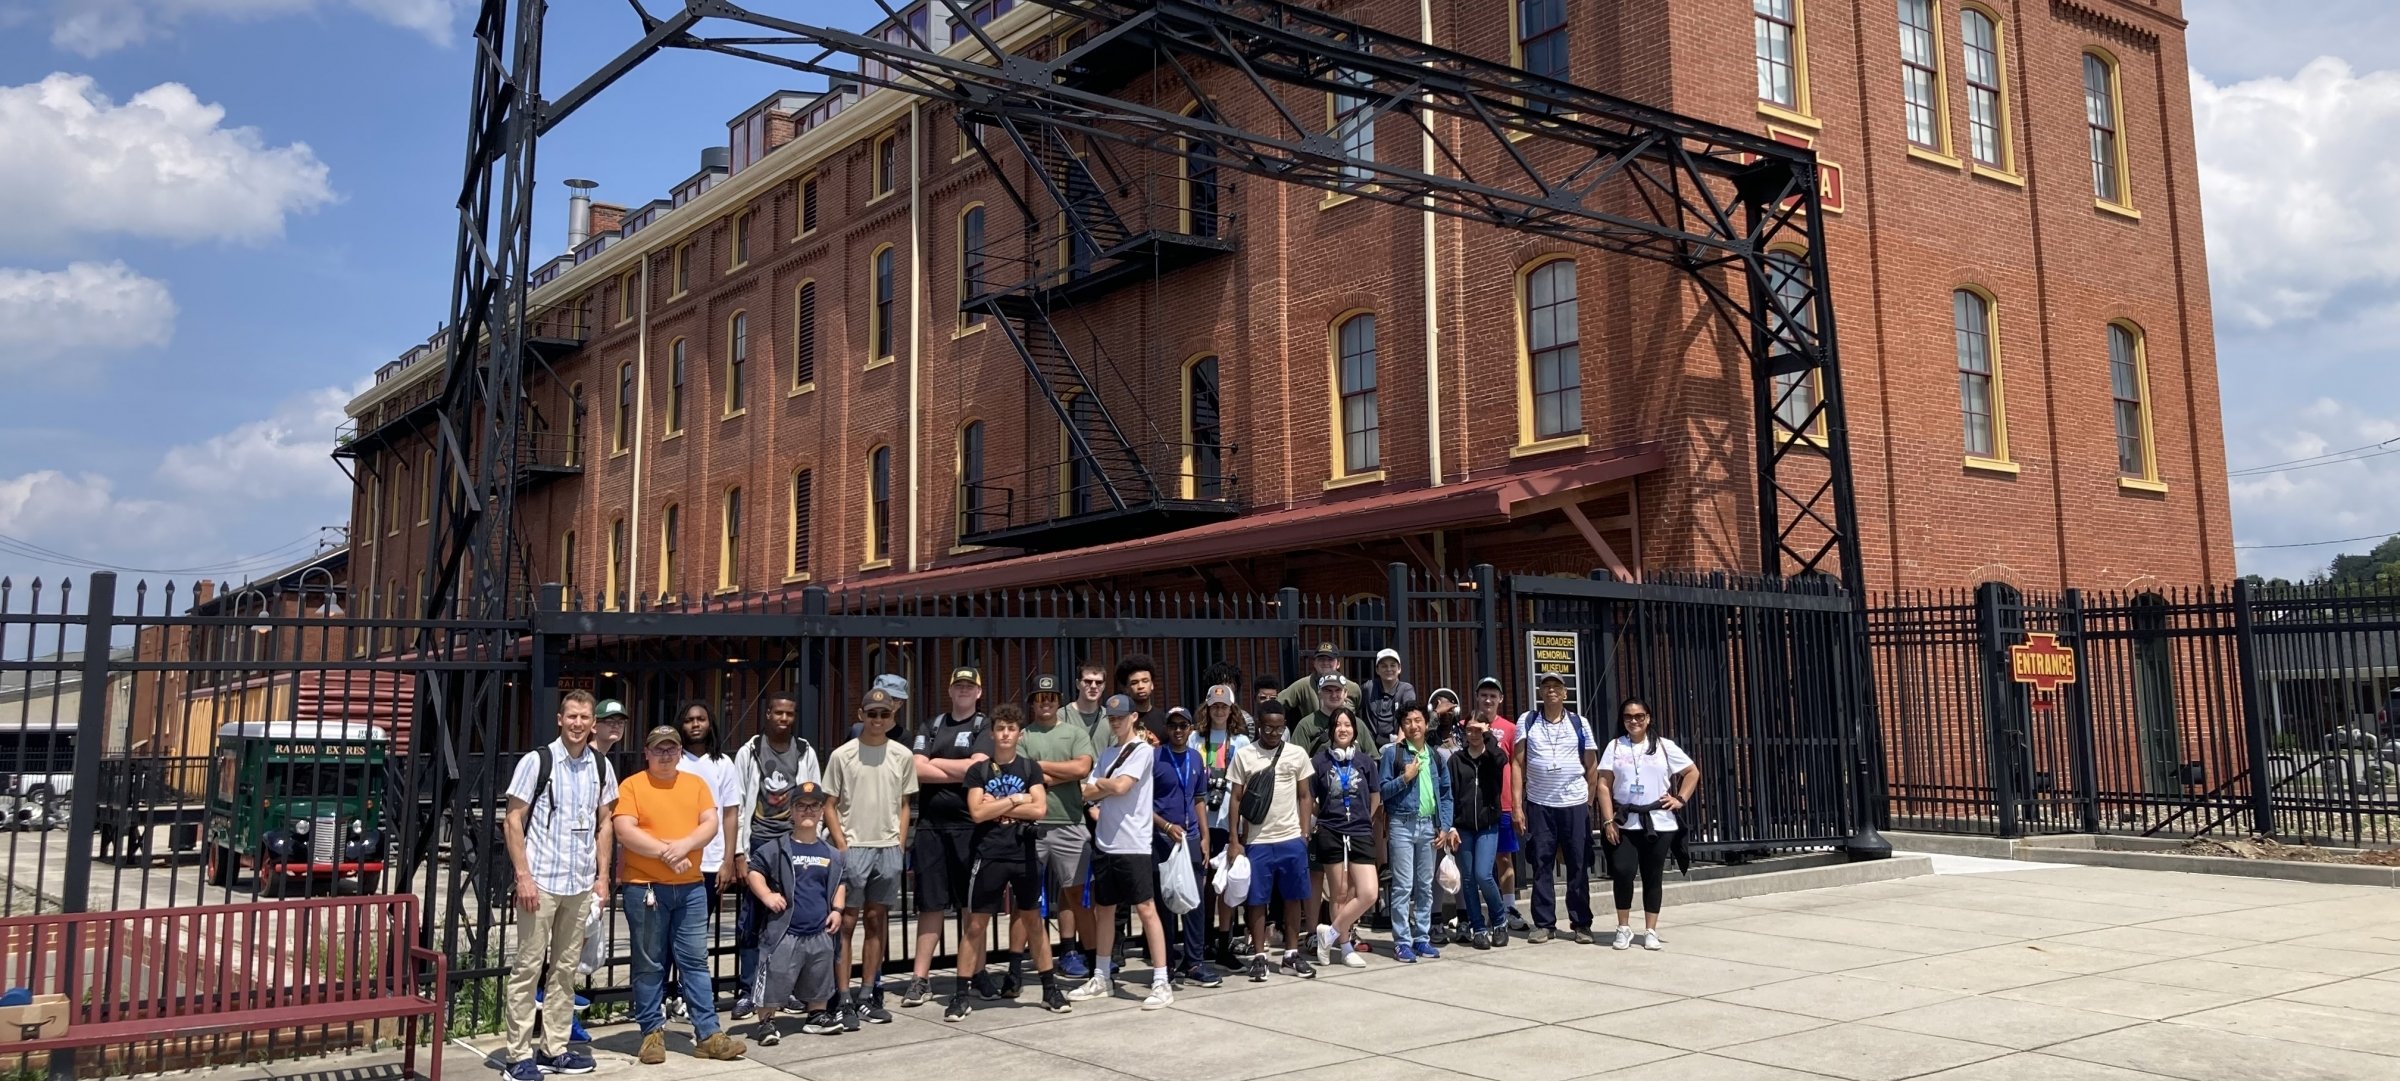 Large group of diverse students outside a railroad museum